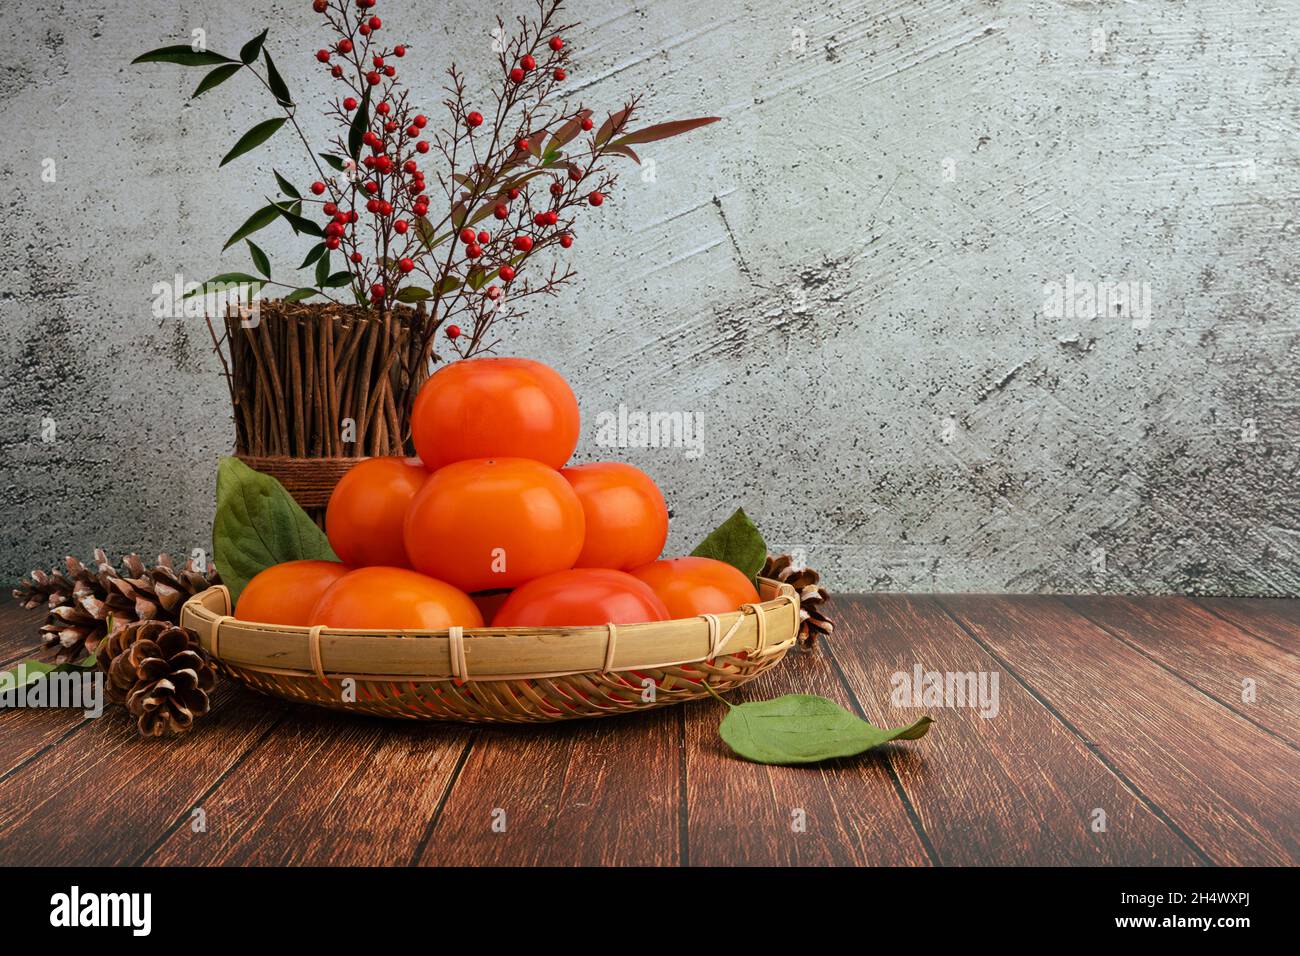 Ripe persimmons in a bamboo basket. Persimmon set front view, horizontal wooden table background. Stock Photo